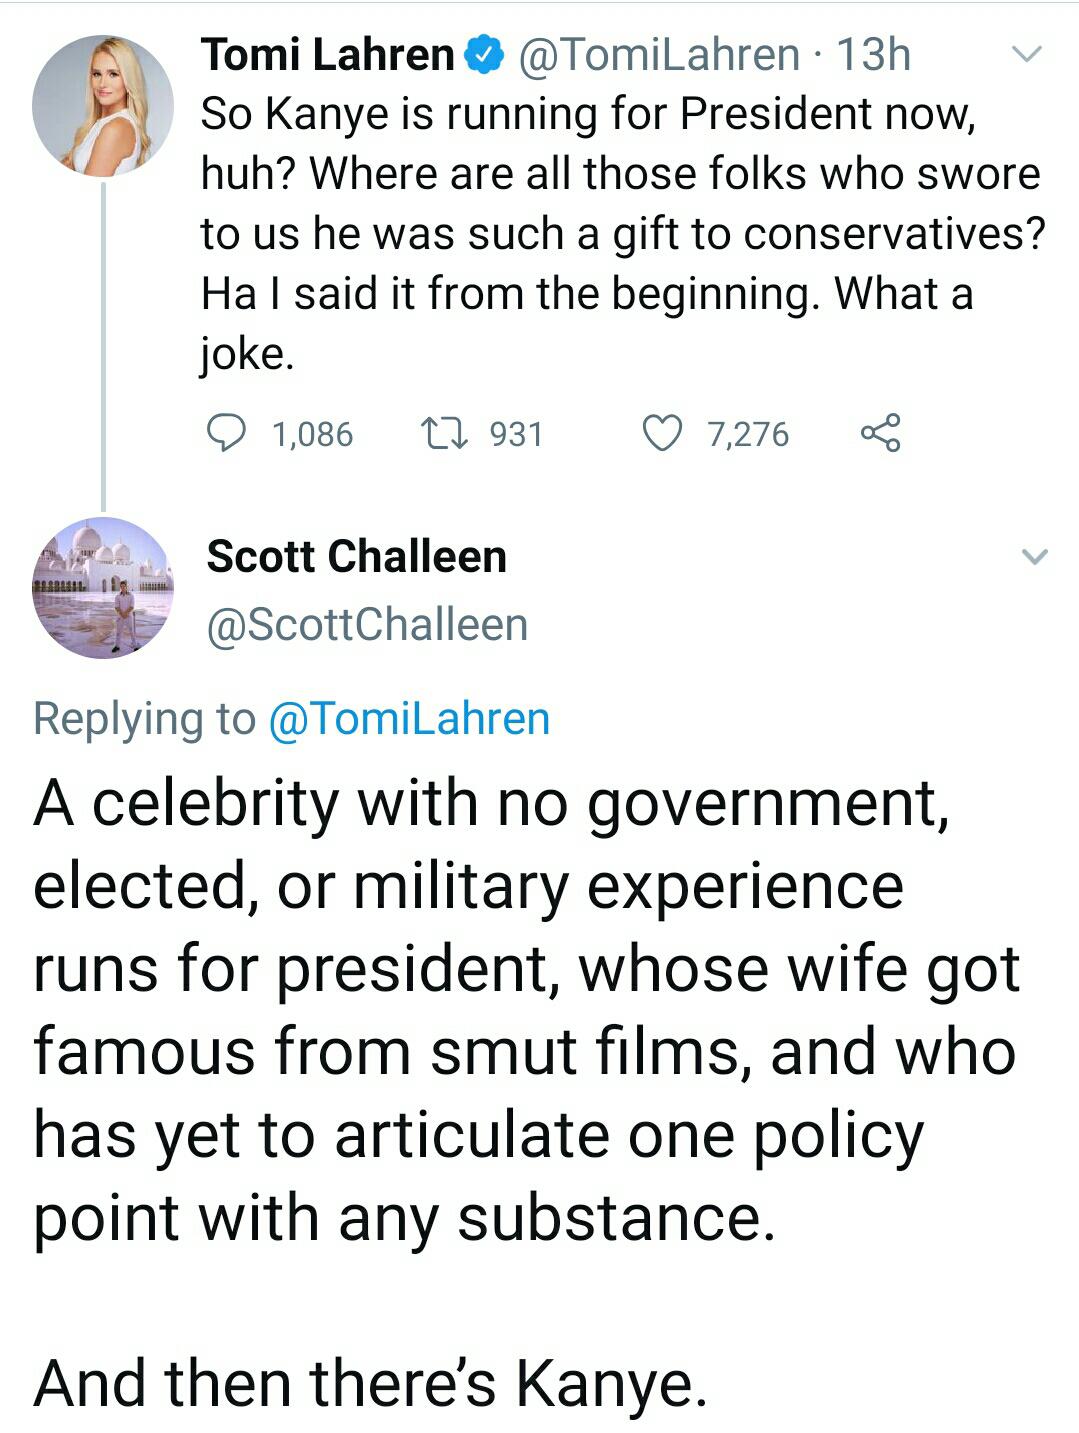 funny comments - So Kanye is running for President now, huh? Where are all those folks who swore to us he was such a gift to conservatives? Hal said it from the beginning. What a joke. - A celebrity with